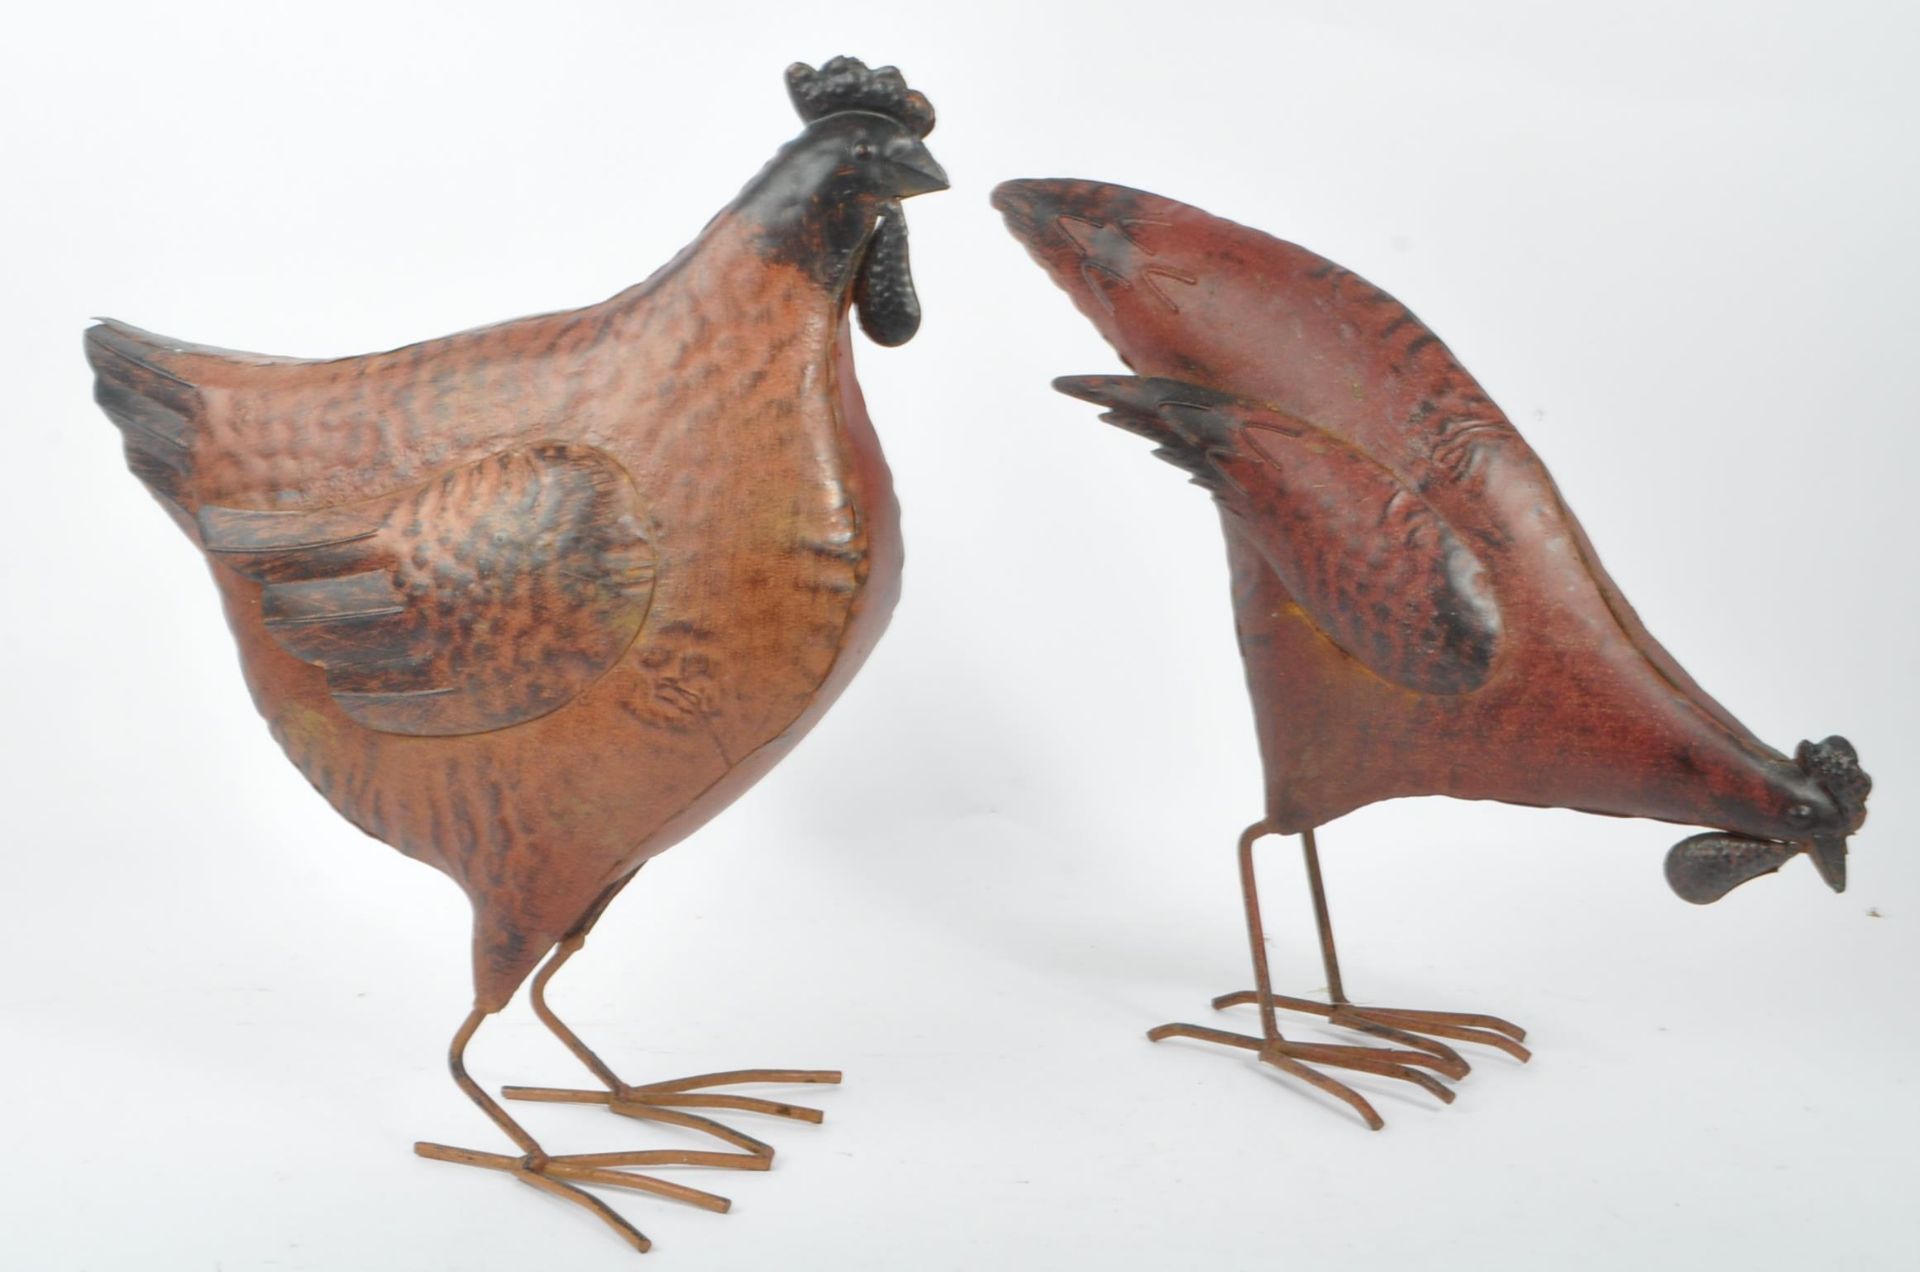 TWO 20TH CENTURY DECORATIVE METAL GARDEN CHICKENS - Image 7 of 7